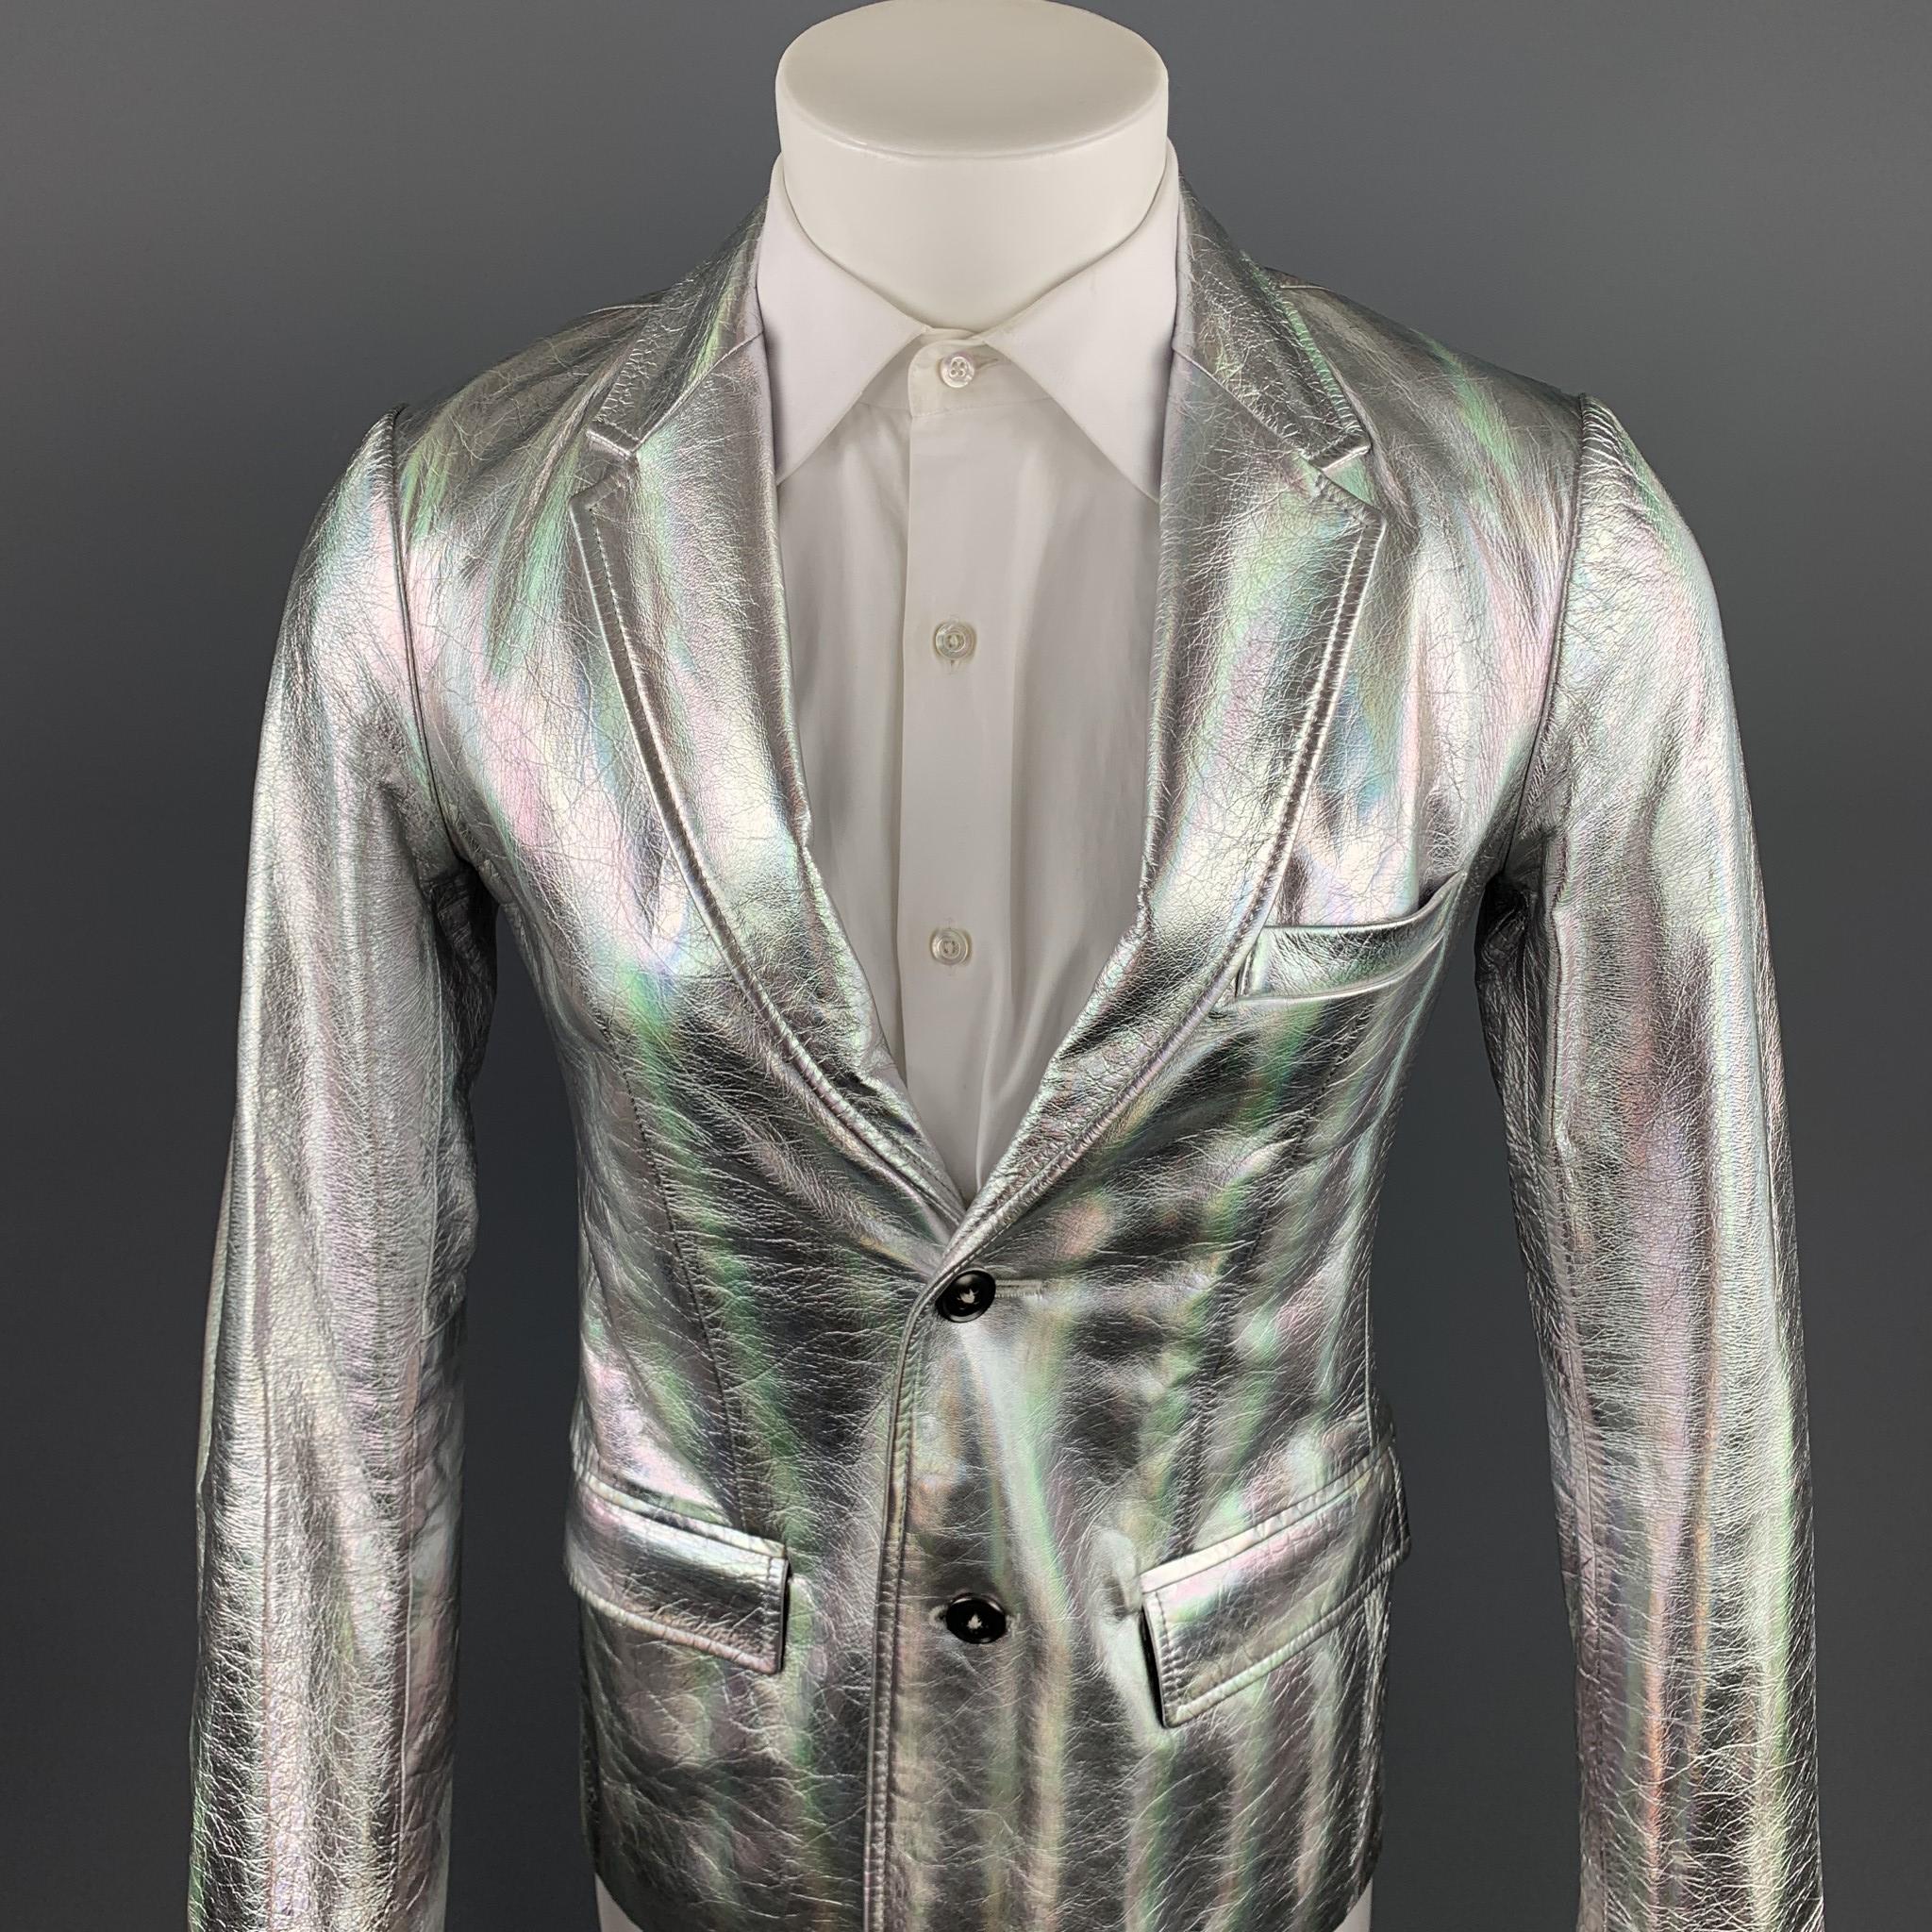 MARC by MARC JACOBS sport coat comes in a silver iridescent leather with a full liner featuring a notch lapel, flap pockets, and a two button closure.

Very Good Pre-Owned Condition.
Marked: S

Measurements:

Shoulder: 16.5 in. 
Chest: 36 in.